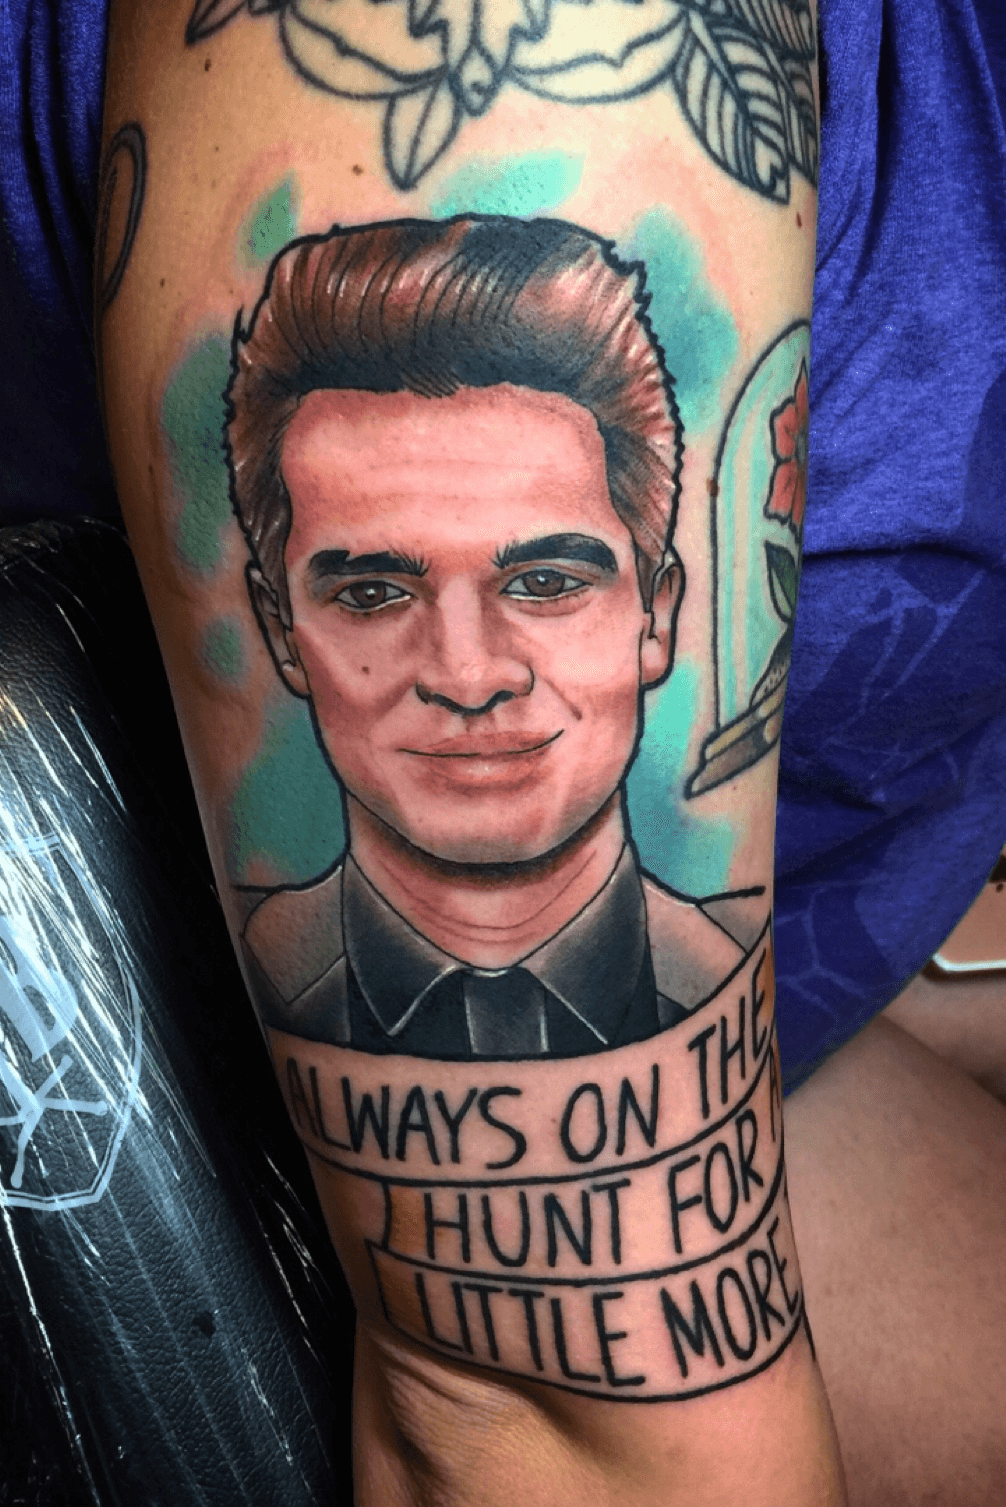 brendonuriesource  Brendon Urie showing his new tattoo